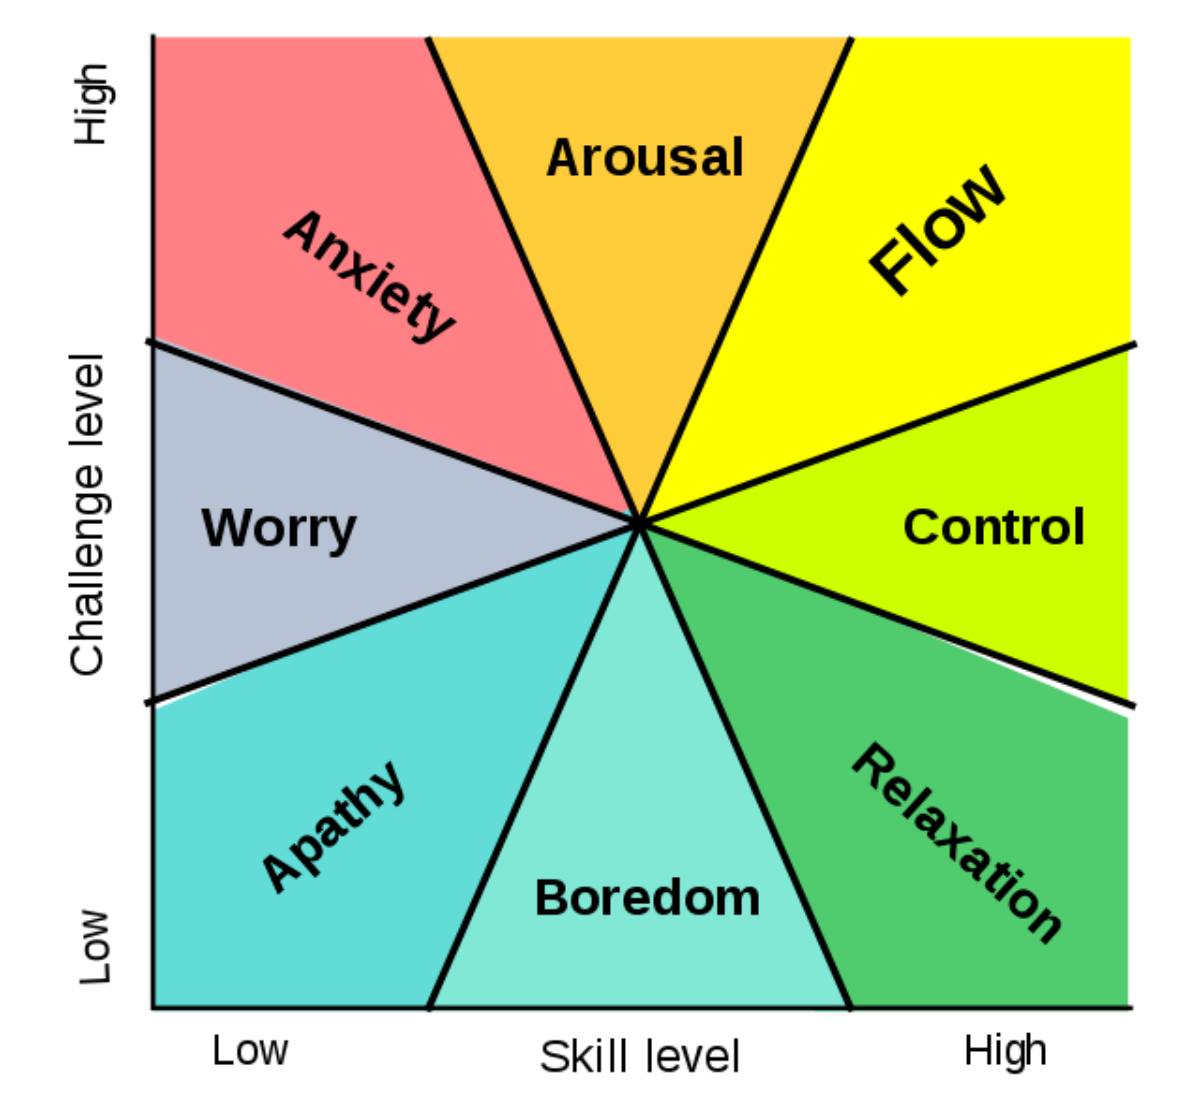 A more complicated graph showing regions marked flow, anxiety, boredom, relaxation, arousal, and other mind states against skill and difficulty